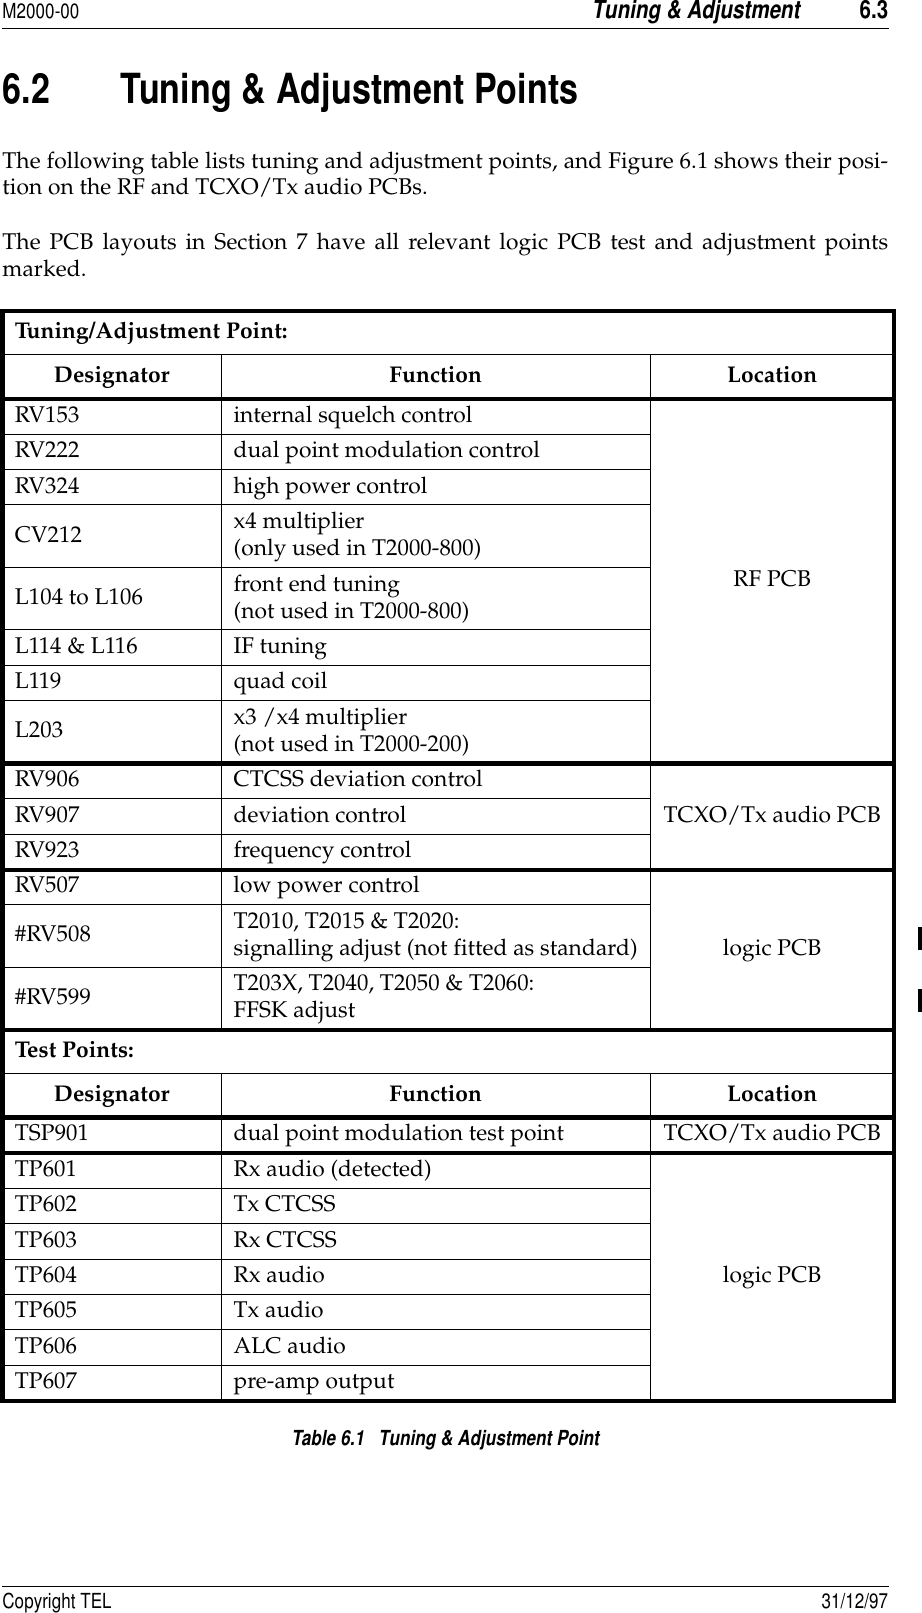 M2000-00Tuning &amp; Adjustment6.3Copyright TEL 31/12/976.2 Tuning &amp; Adjustment Points The following table lists tuning and adjustment points, and Figure 6.1 shows their posi-tion on the RF and TCXO/Tx audio PCBs. The PCB layouts in Section 7 have all relevant logic PCB test and adjustment pointsmarked.Table 6.1   Tuning &amp; Adjustment PointTuning/Adjustment Point:Designator Function LocationRV153 internal squelch controlRF PCBRV222 dual point modulation controlRV324 high power controlCV212 x4 multiplier (only used in T2000-800)L104 to L106 front end tuning(not used in T2000-800)L114 &amp; L116 IF tuningL119 quad coilL203 x3 /x4 multiplier(not used in T2000-200)RV906 CTCSS deviation controlTCXO/Tx audio PCBRV907 deviation controlRV923 frequency controlRV507 low power controllogic PCB#RV508 T2010, T2015 &amp; T2020: signalling adjust (not fitted as standard)#RV599 T203X, T2040, T2050 &amp; T2060: FFSK adjustTest Po int s:Designator Function LocationTSP901 dual point modulation test point TCXO/Tx audio PCBTP601 Rx audio (detected)logic PCBTP602 Tx CTCSSTP603 Rx CTCSSTP604 Rx audioTP605 Tx audioTP606 ALC audioTP607 pre-amp output